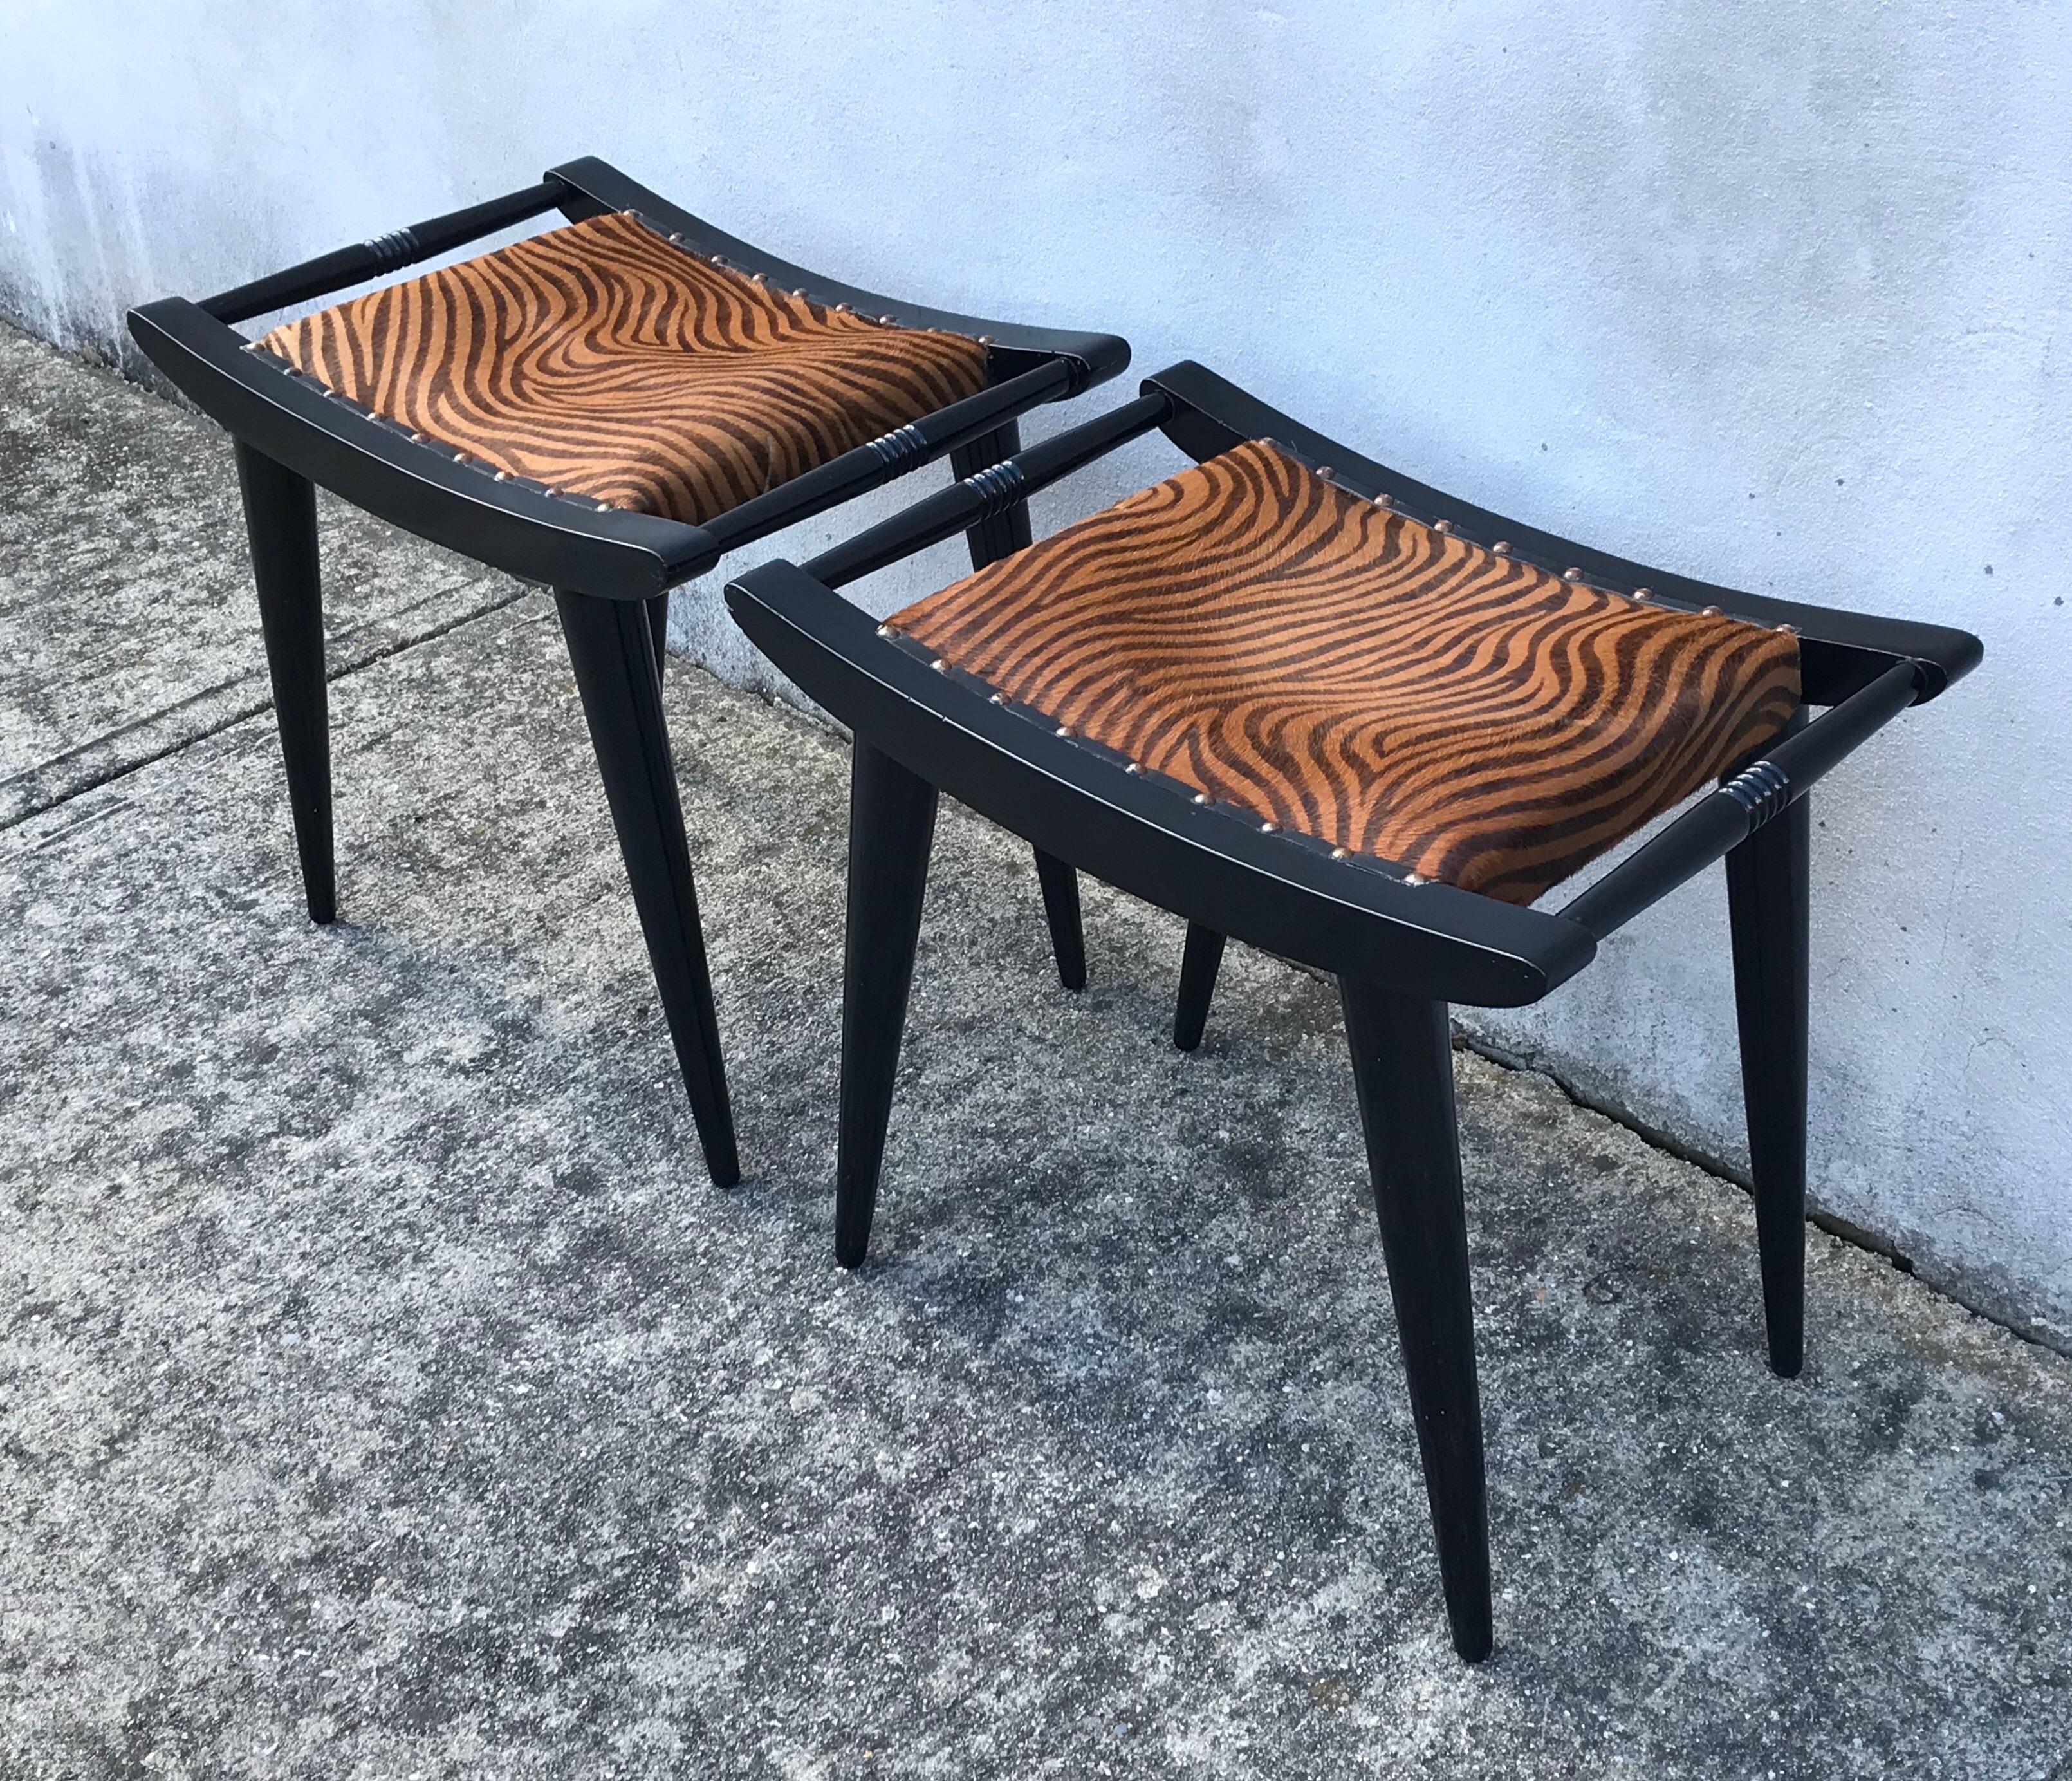 American Pair of Art Deco Black Lacquered Zebra Printed Calf Hair Side Stools, 1930's For Sale